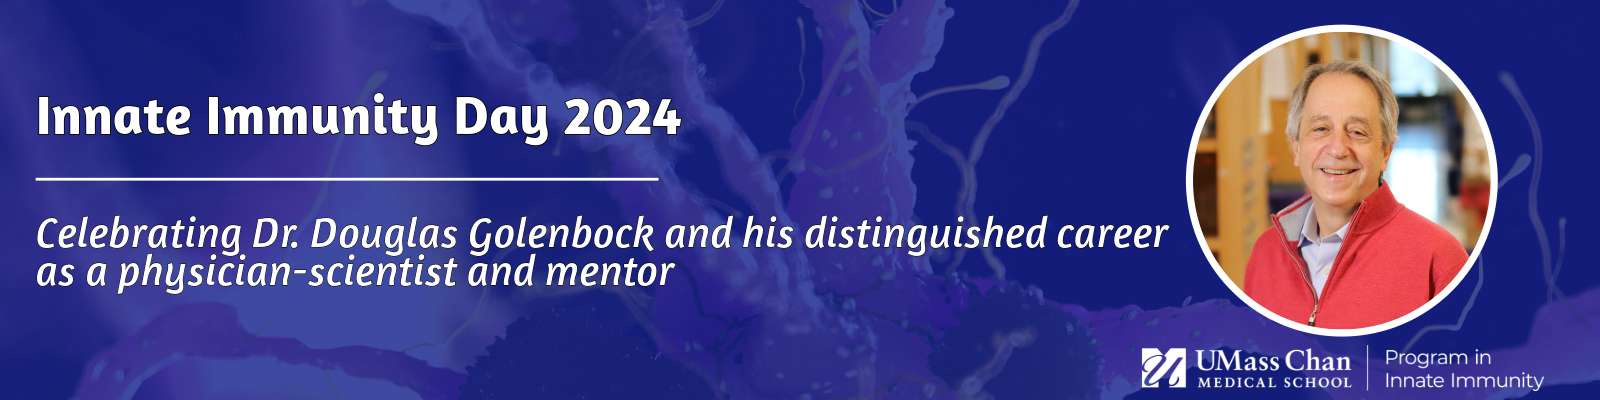 Banner for Innate Immunity Day 2024 Celebrating Dr. Douglas Golenbock and his distinguished career as a physician scientist and mentor